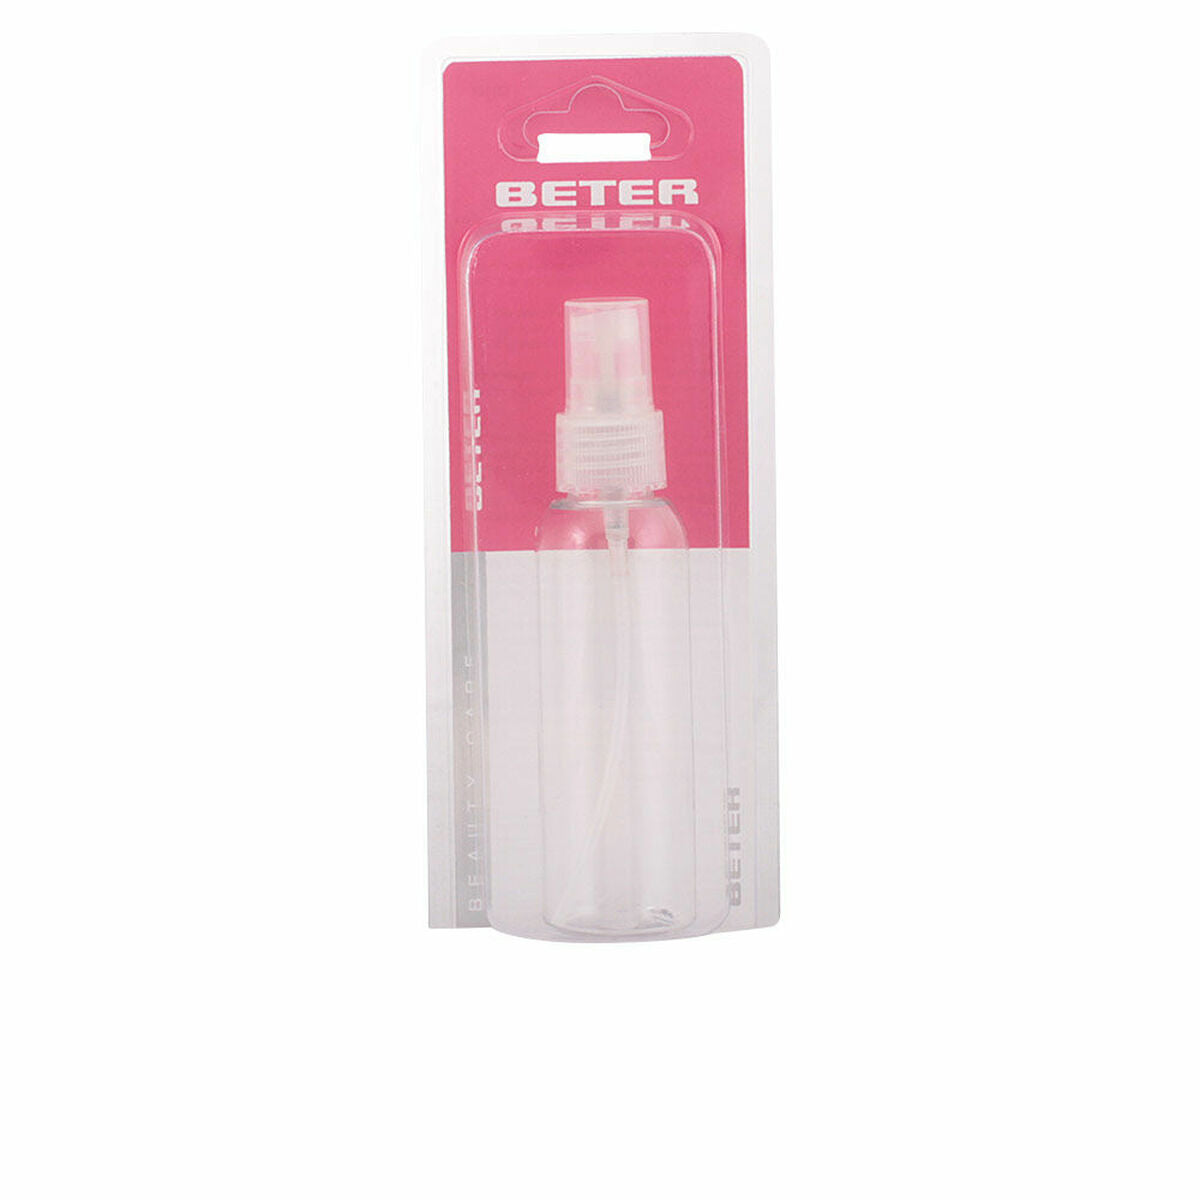 Bouteille Atomiseur Beter 60 ml